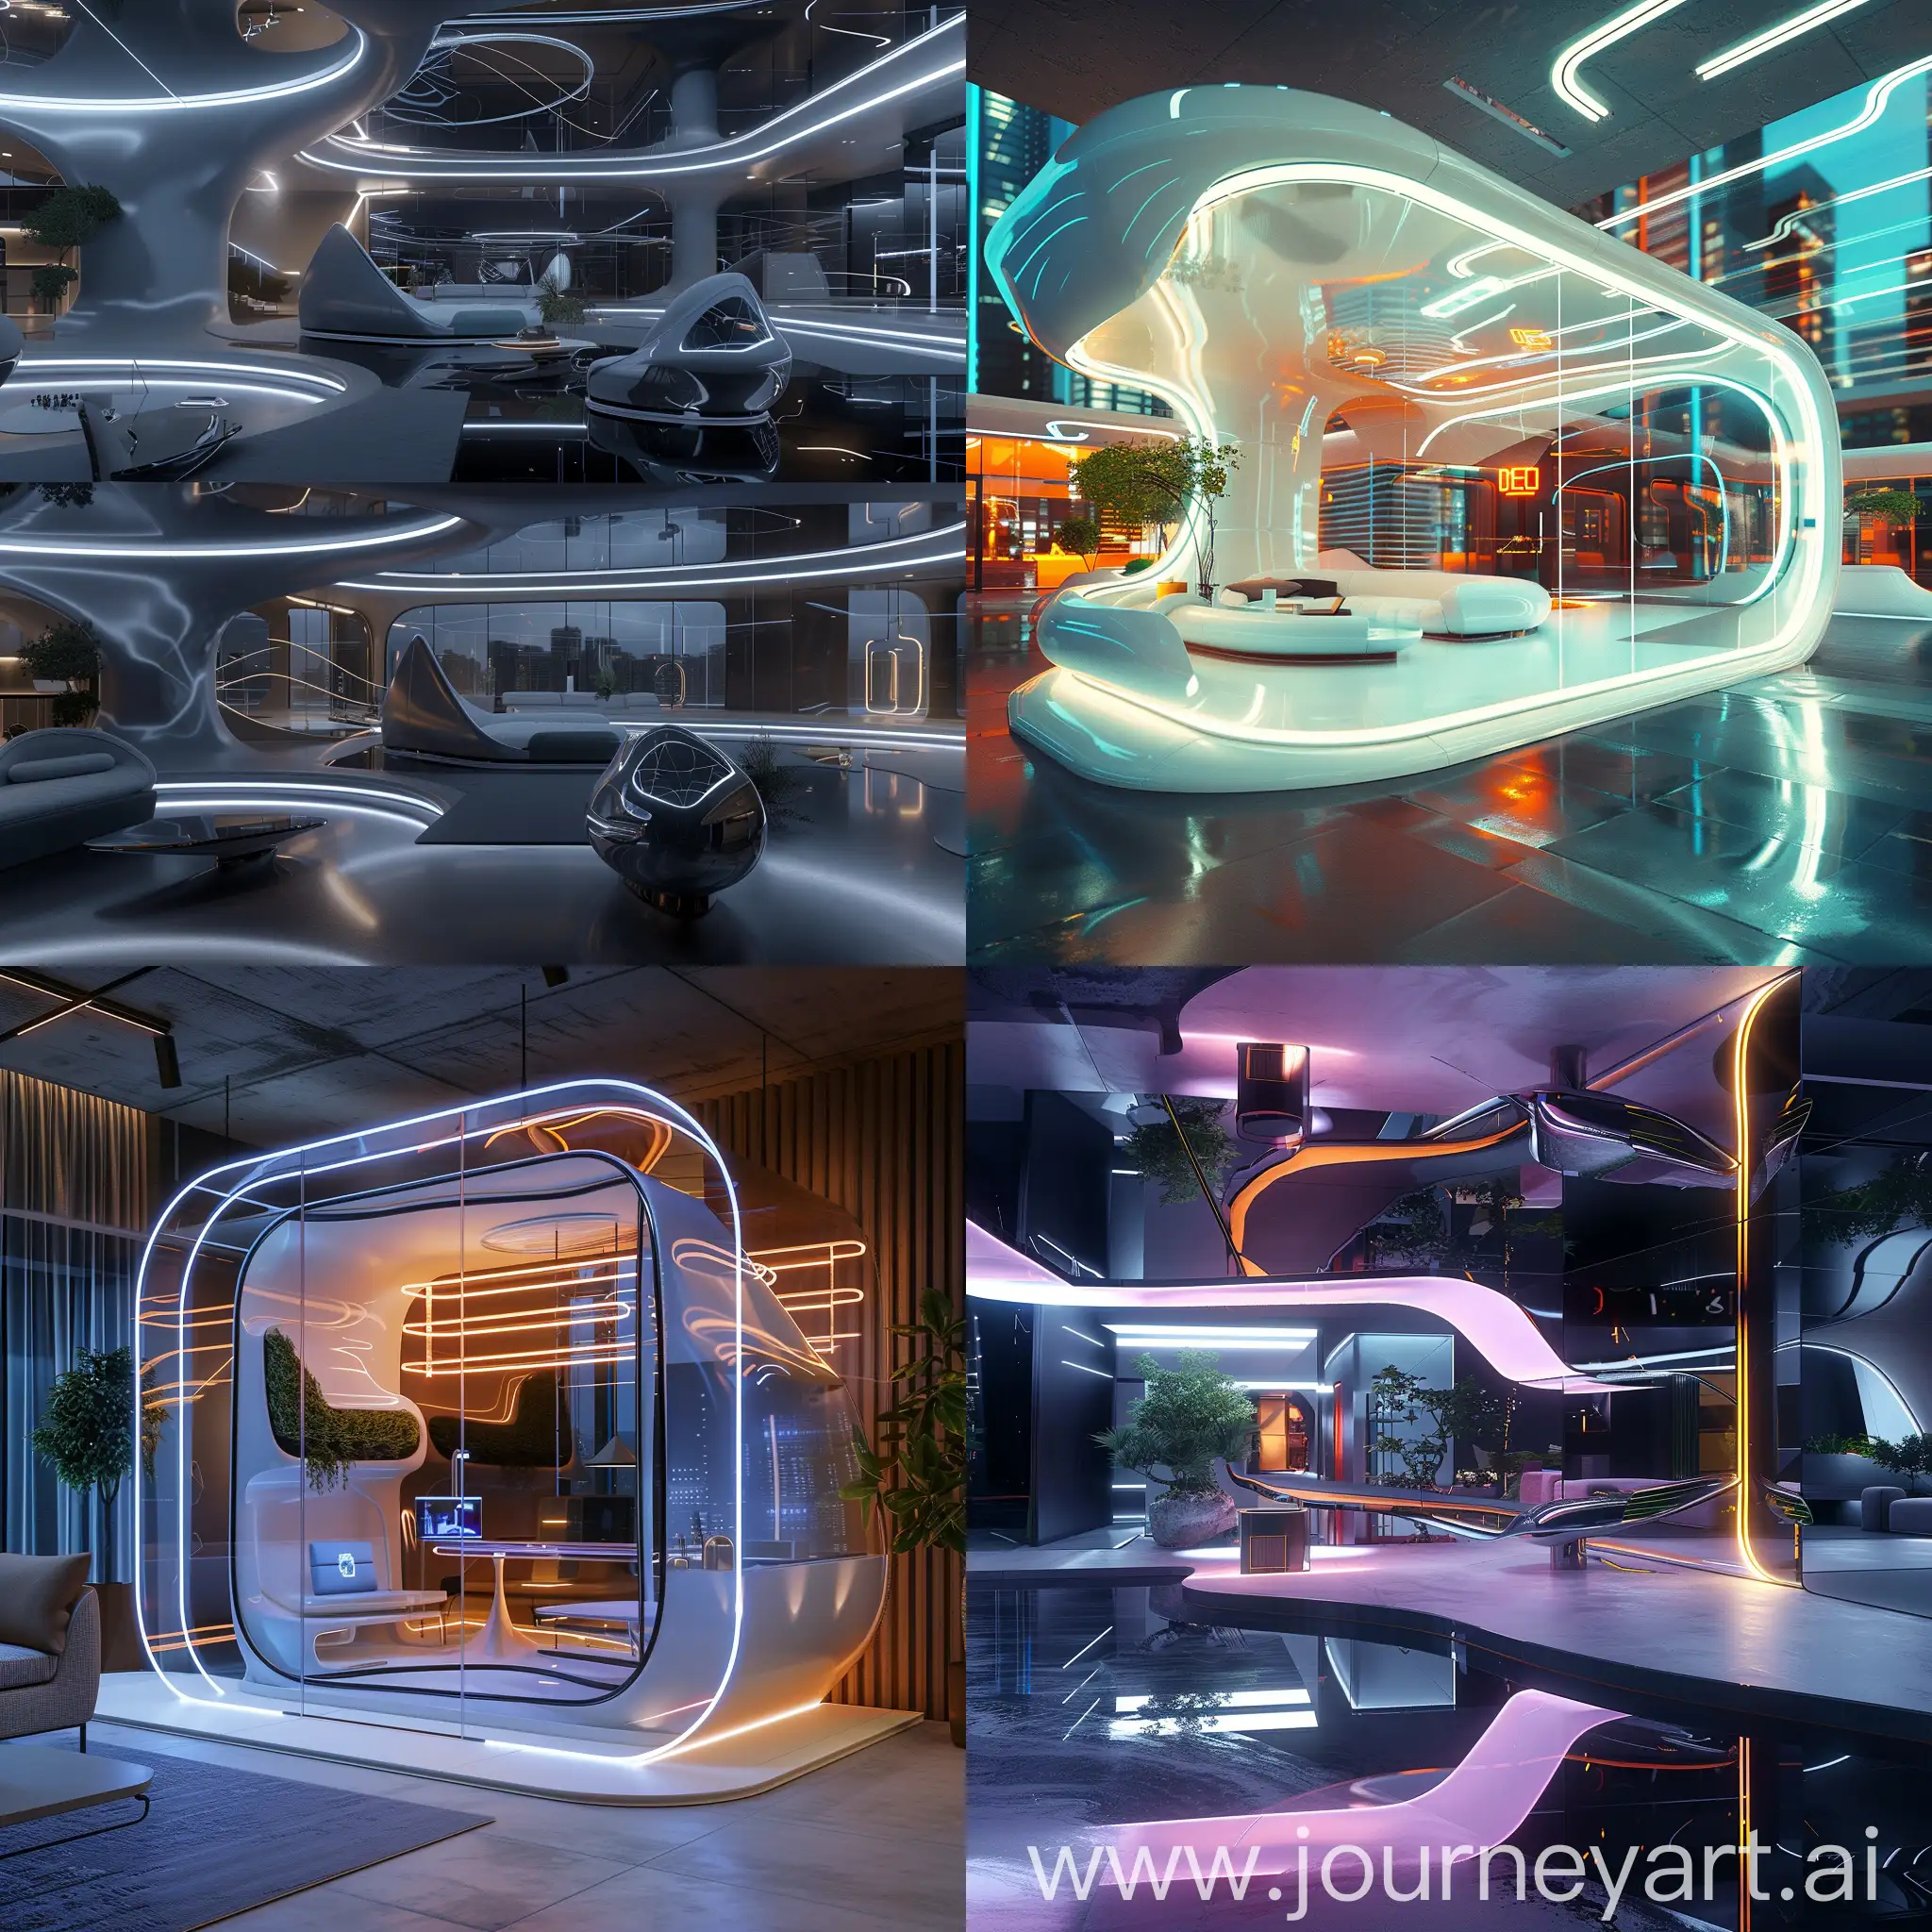 Futuristic-Smart-Home-Design-in-Moscow-Reflective-Surfaces-LED-Lighting-and-EcoFriendly-Innovation